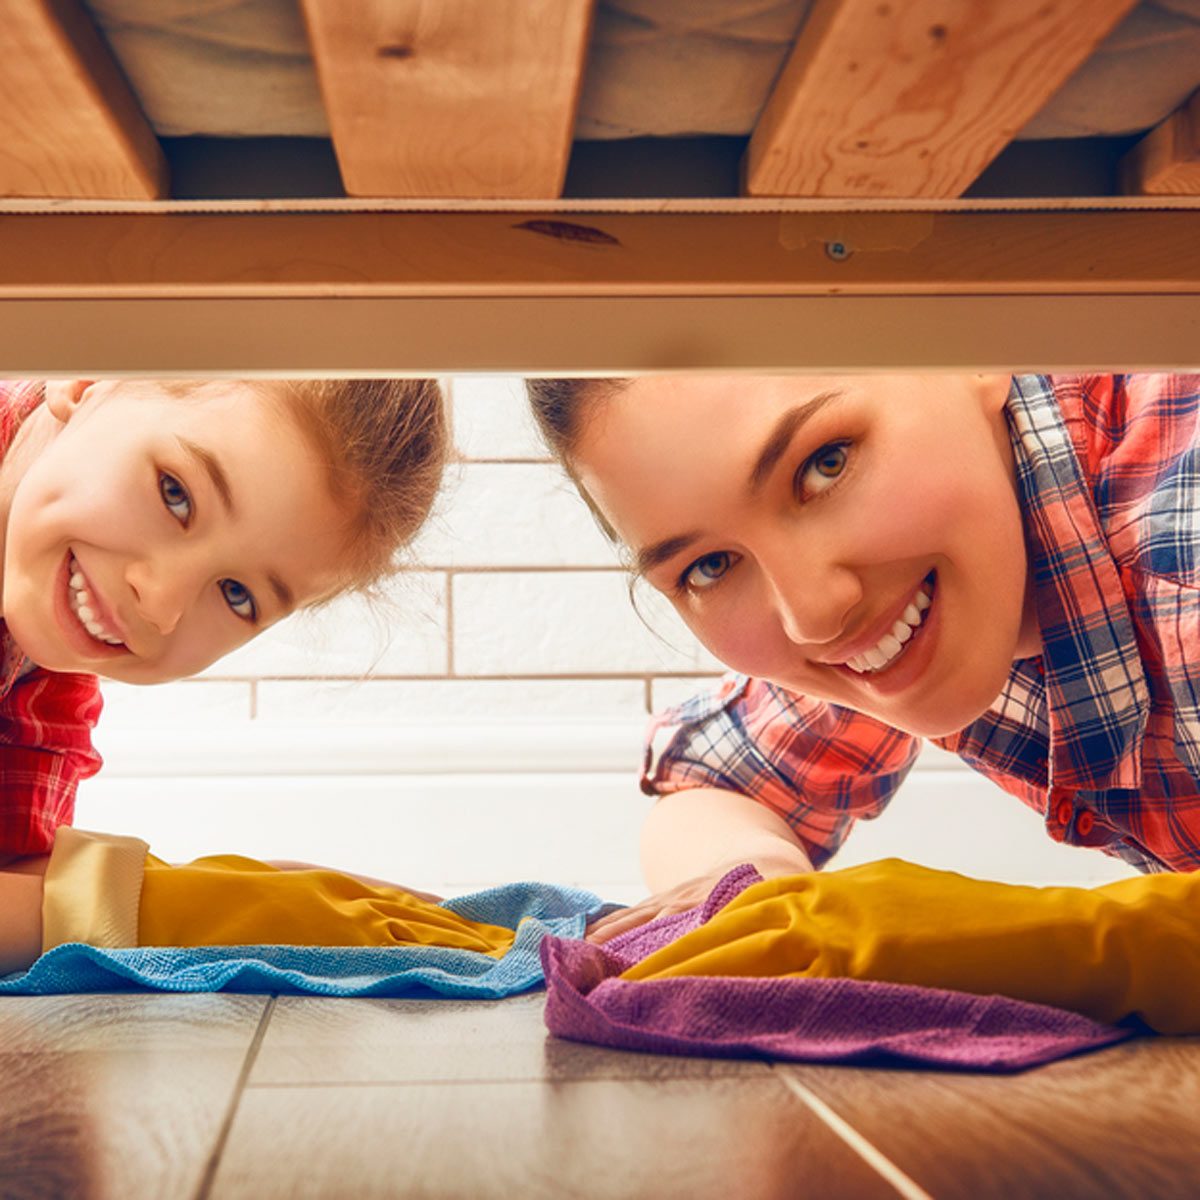 20 Best House Cleaning Tips for People with Allergies